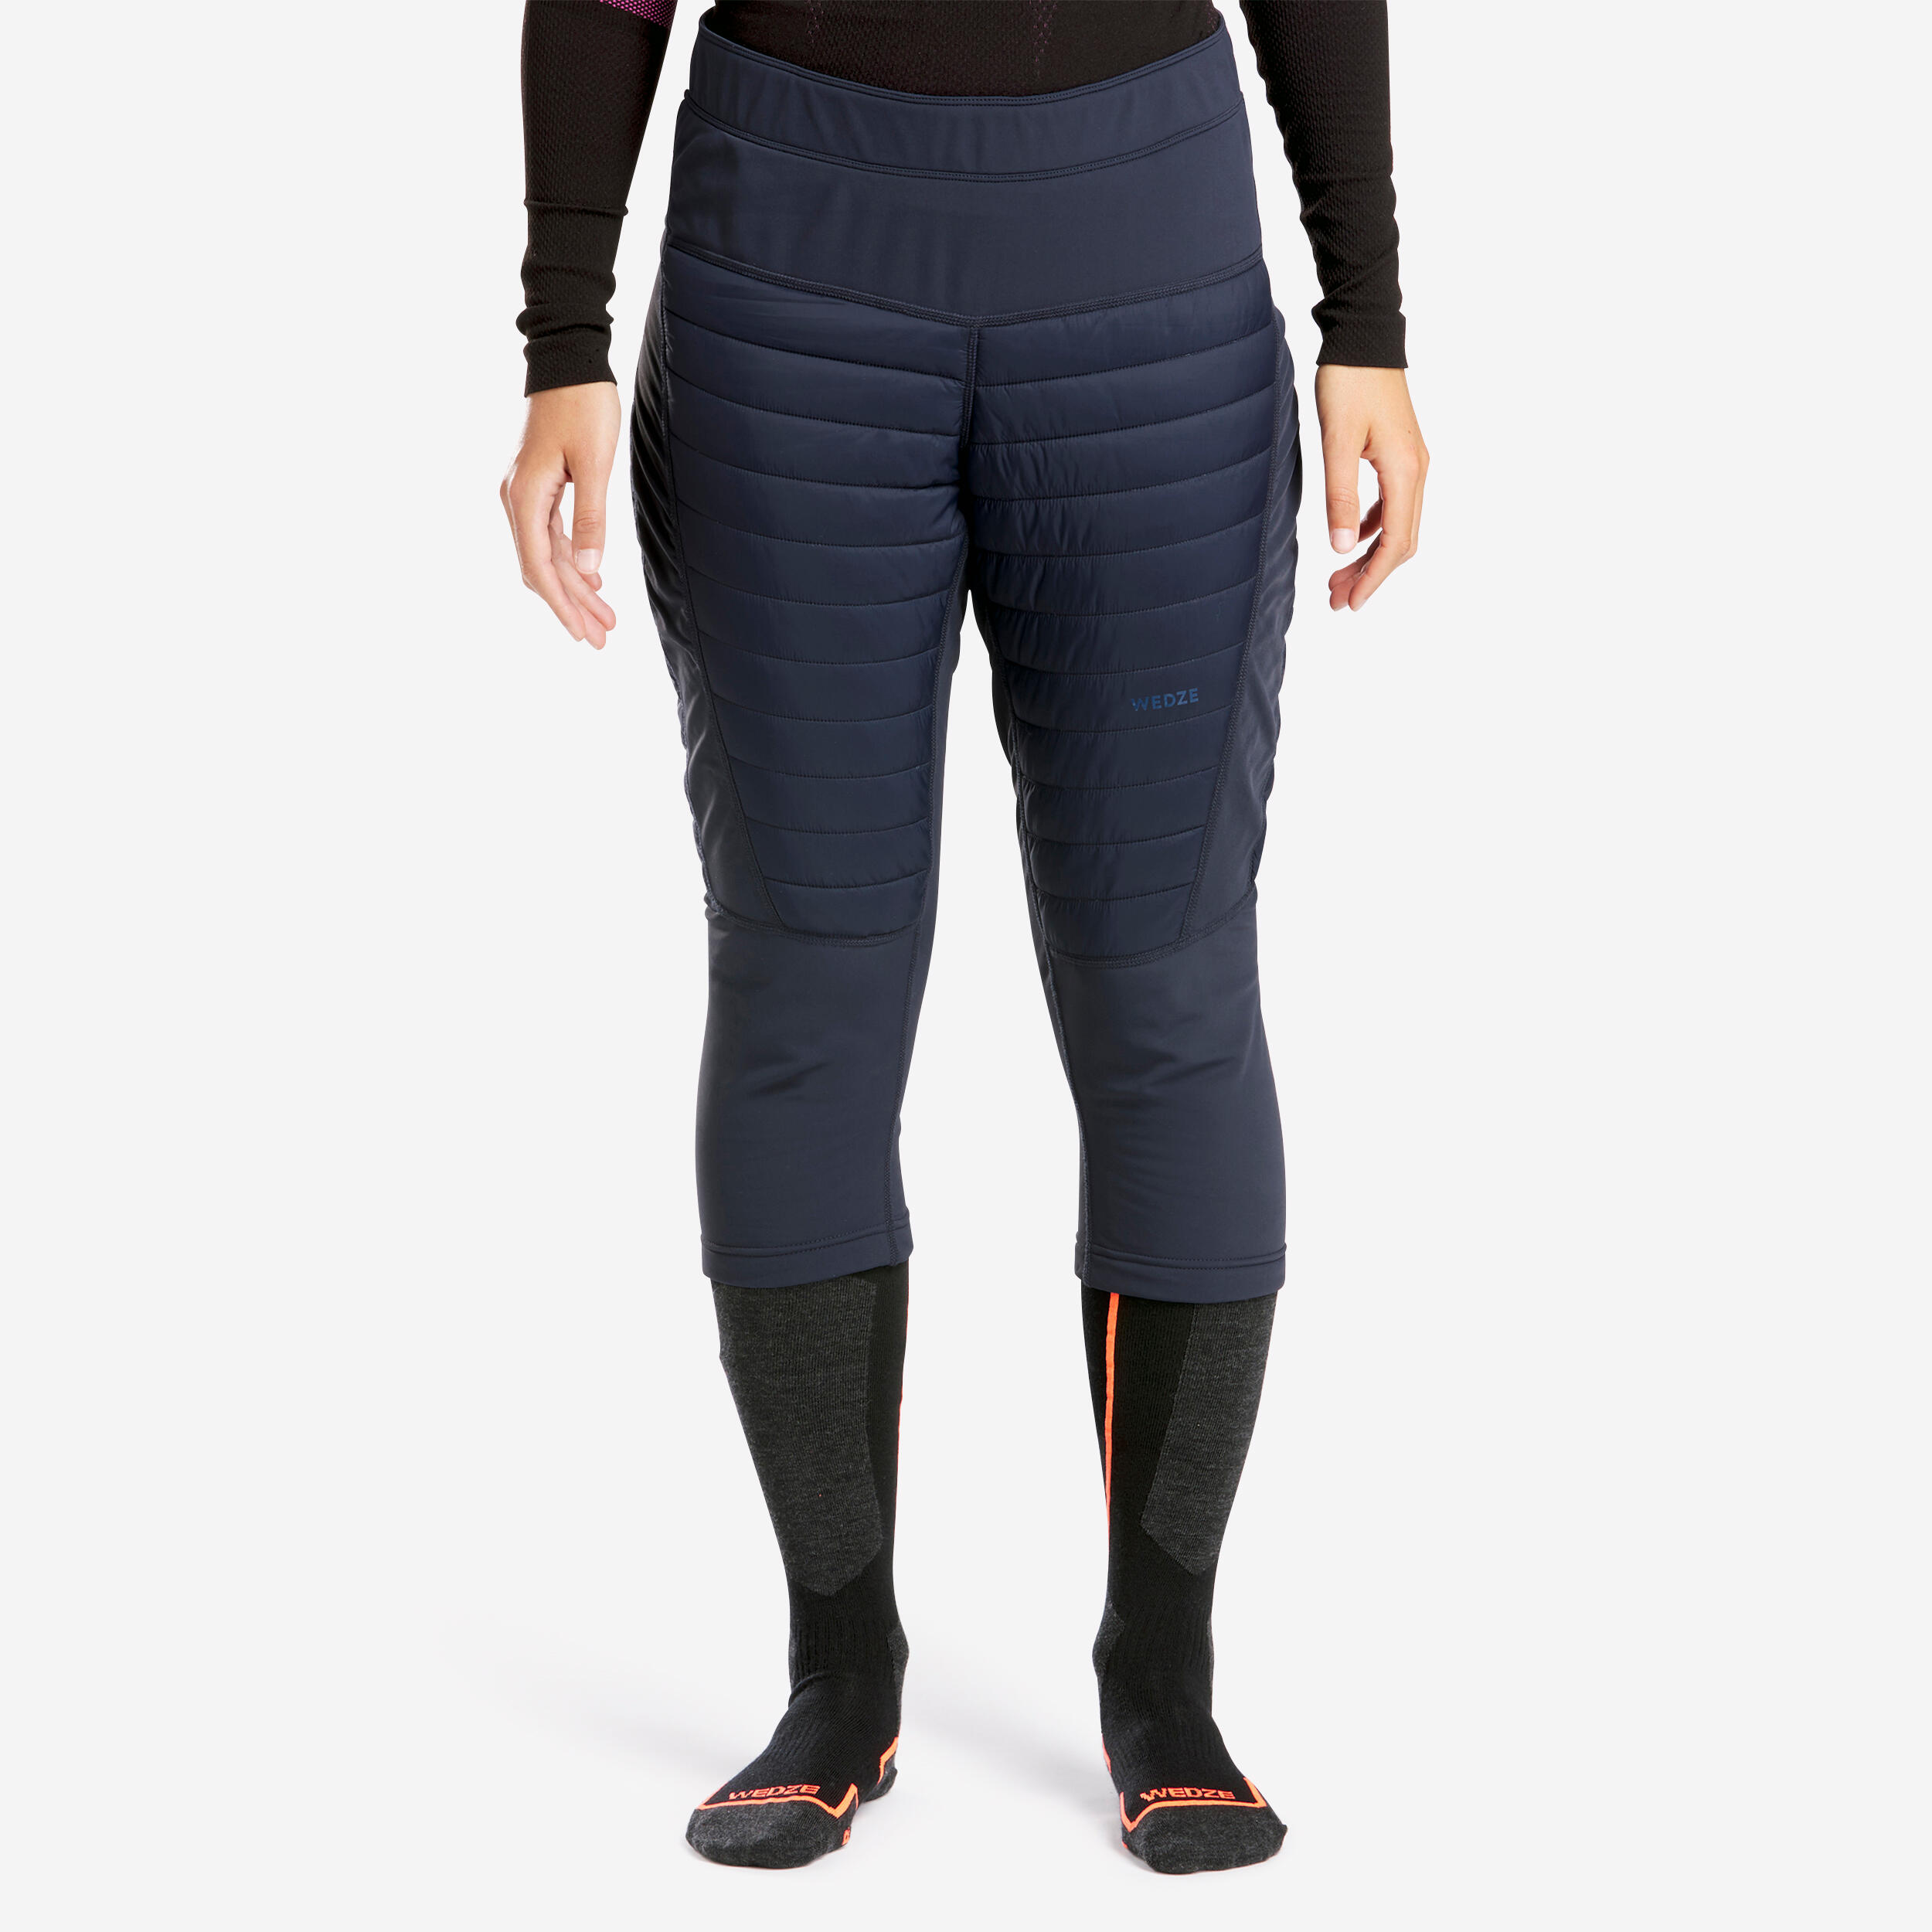 Image of Women's Breathable Base Layer Pants - FR 900 Blue